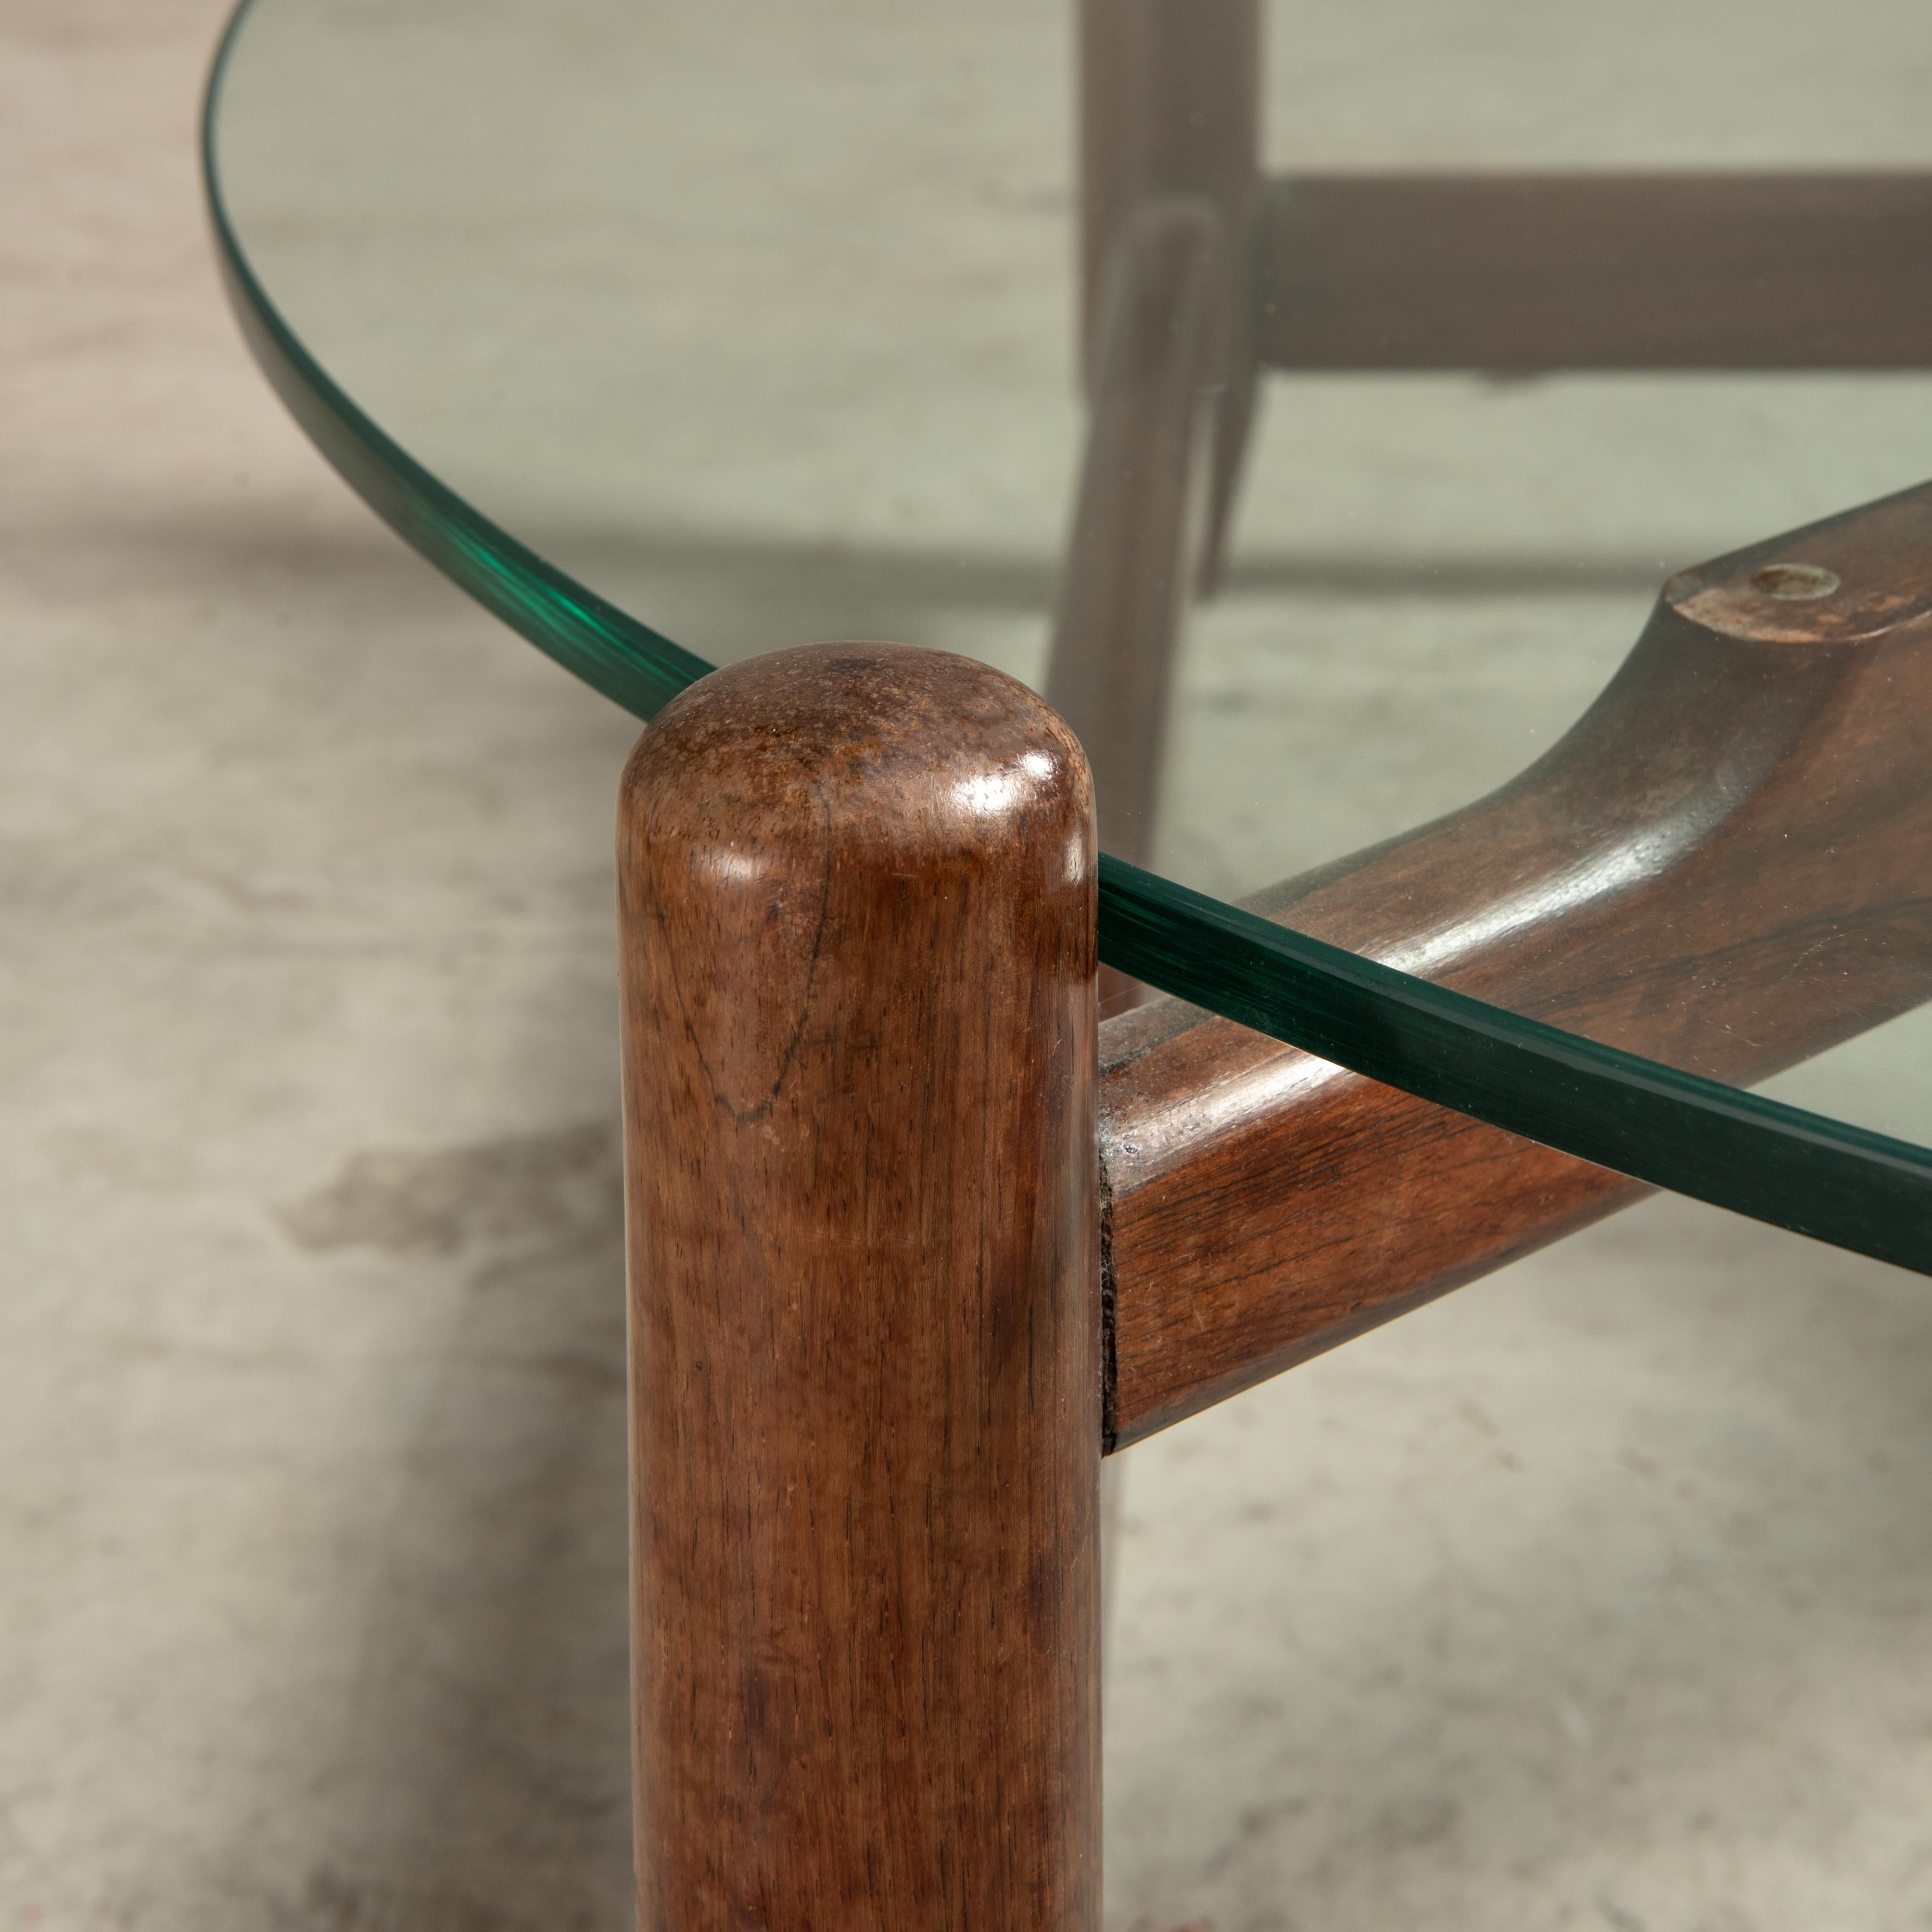 Rounded Coffee Table in Solid Hardwood and Glass, Brazilian Mid-Century Modern For Sale 2